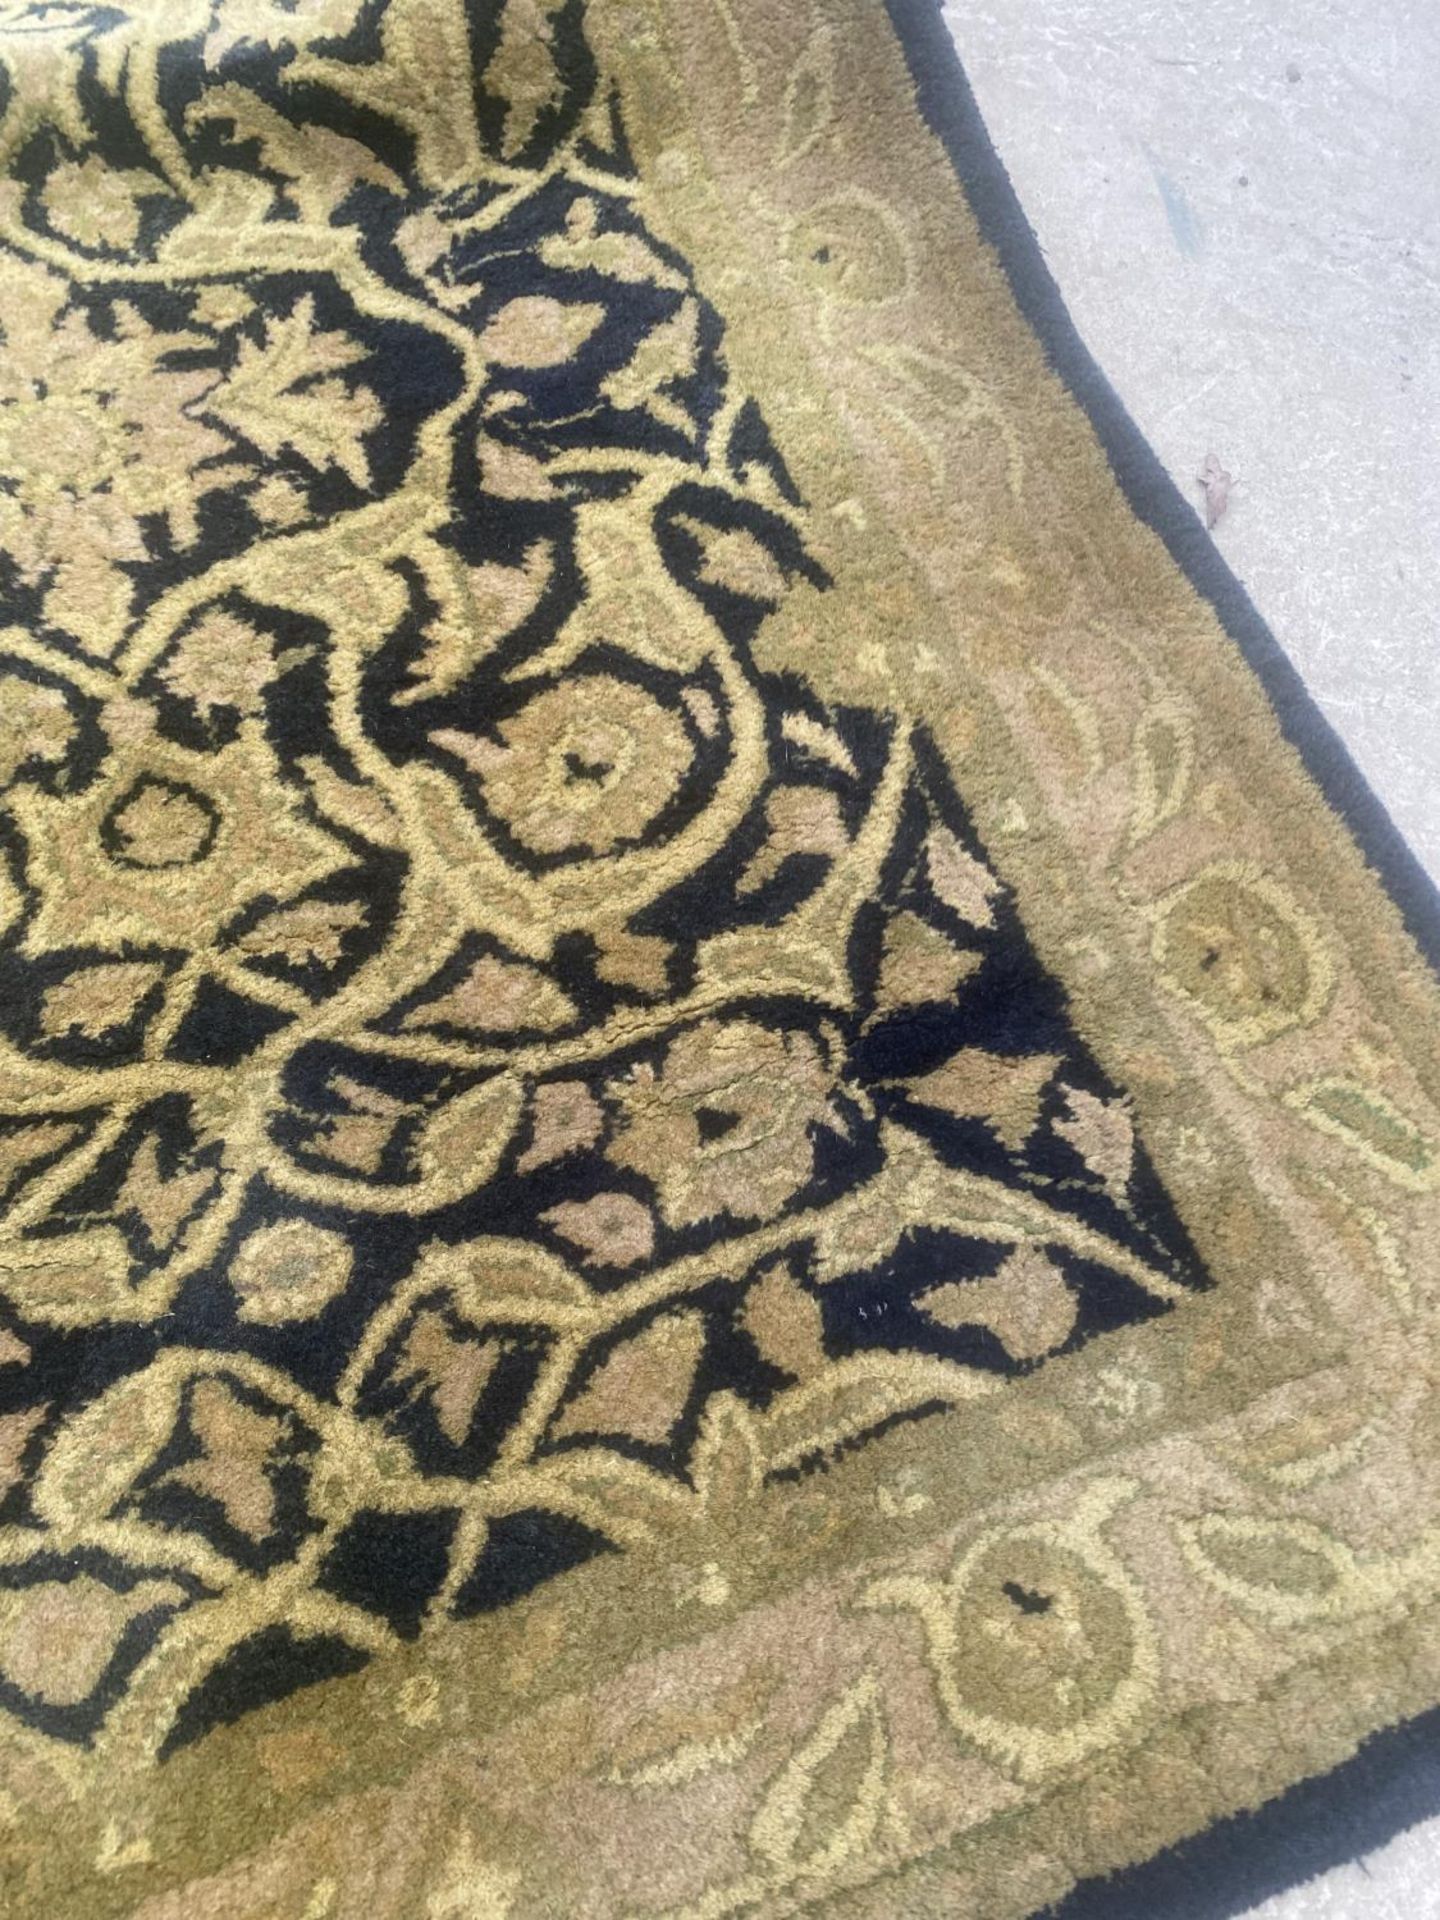 A CREAM PATTERNED RUG - Image 3 of 3